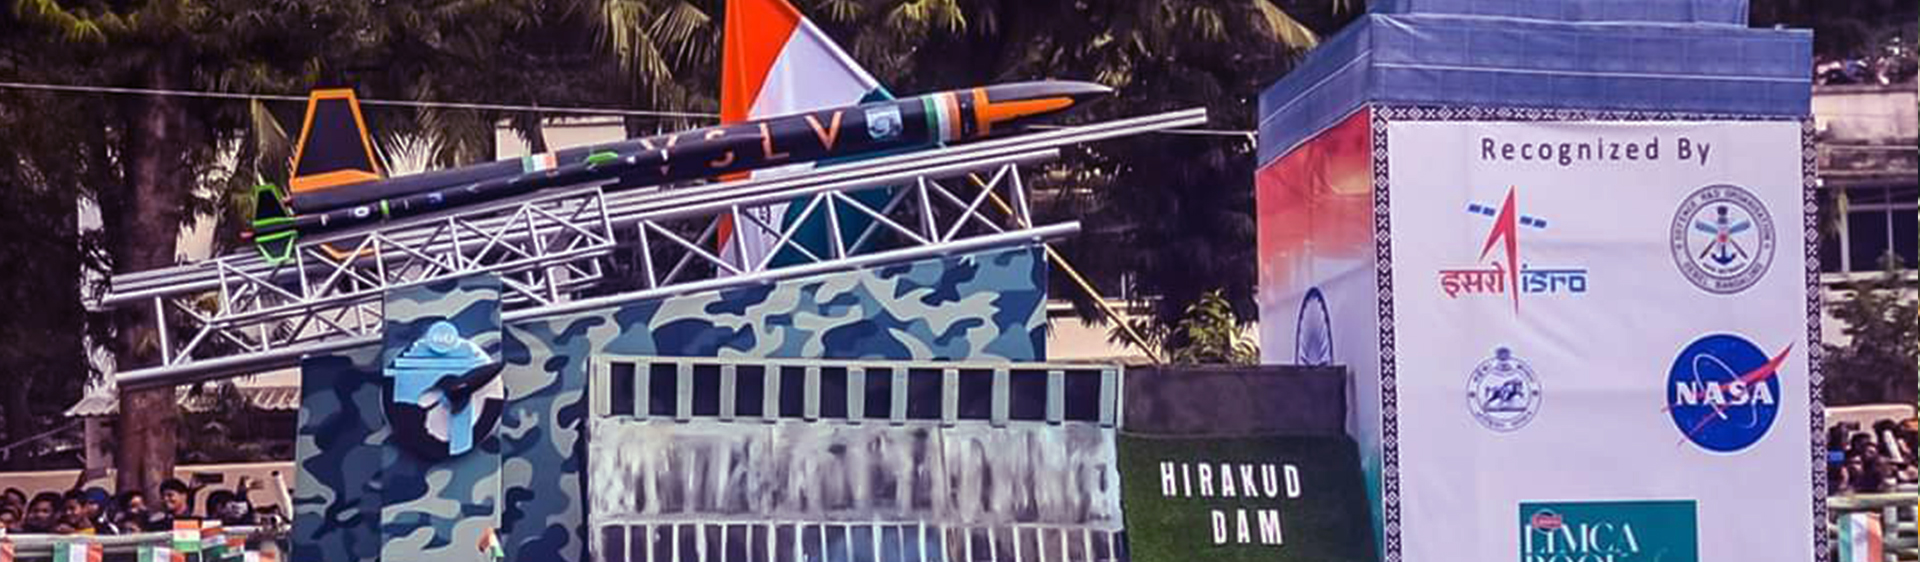 A Tableau  with a Rocket on display at the Republic Day Parade in Bhubaneswar